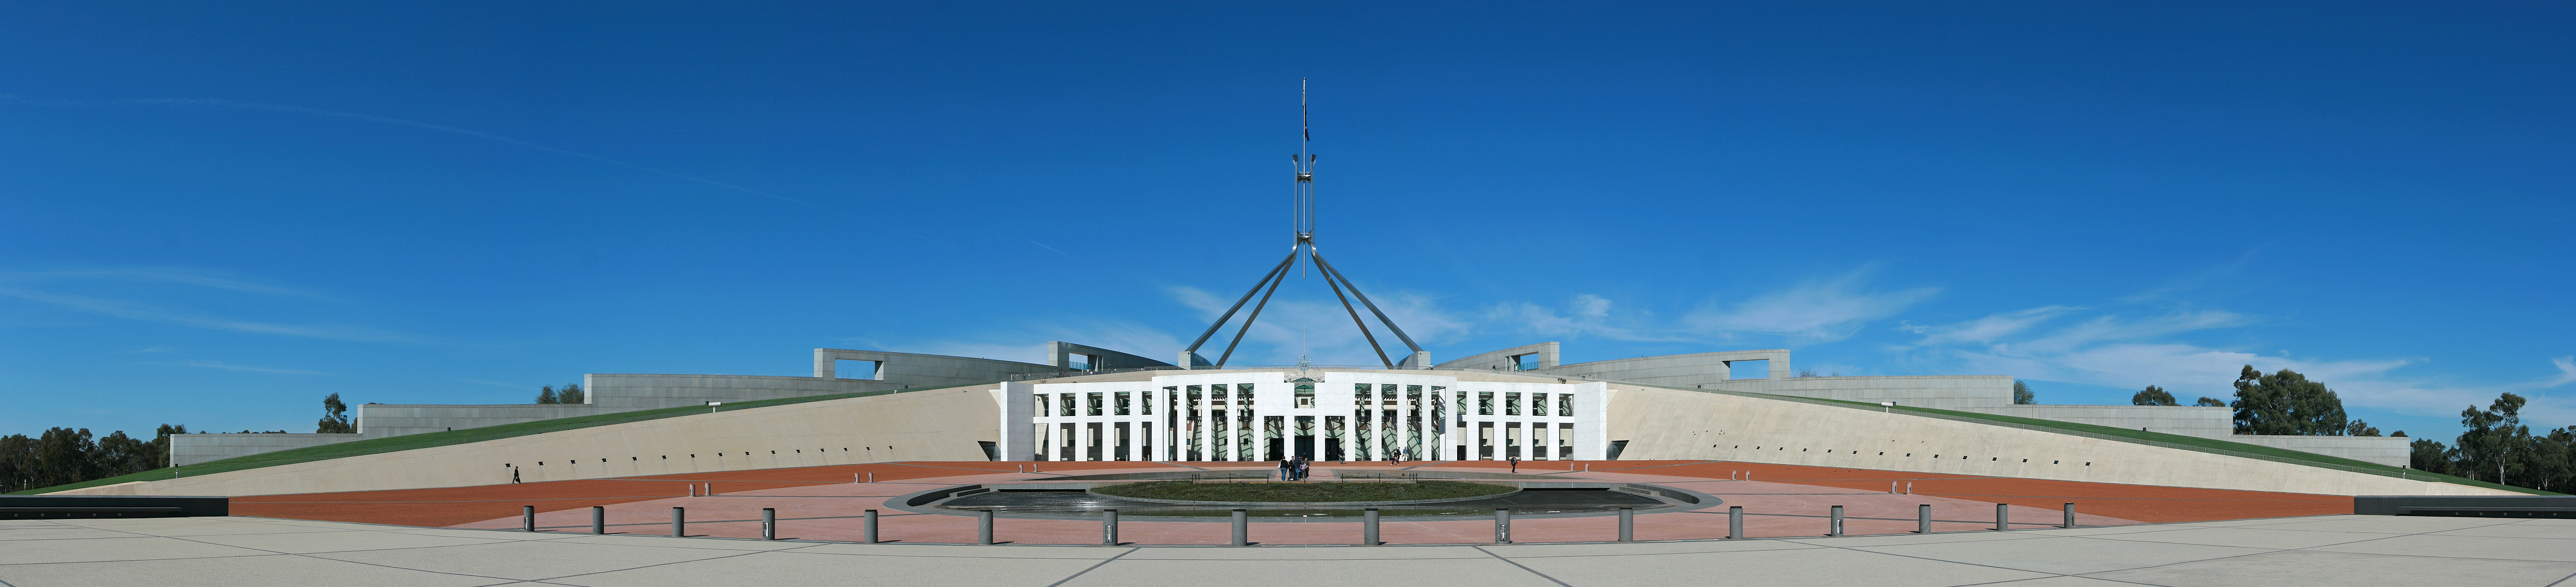 Parliament House, Canberra - Wikipedia